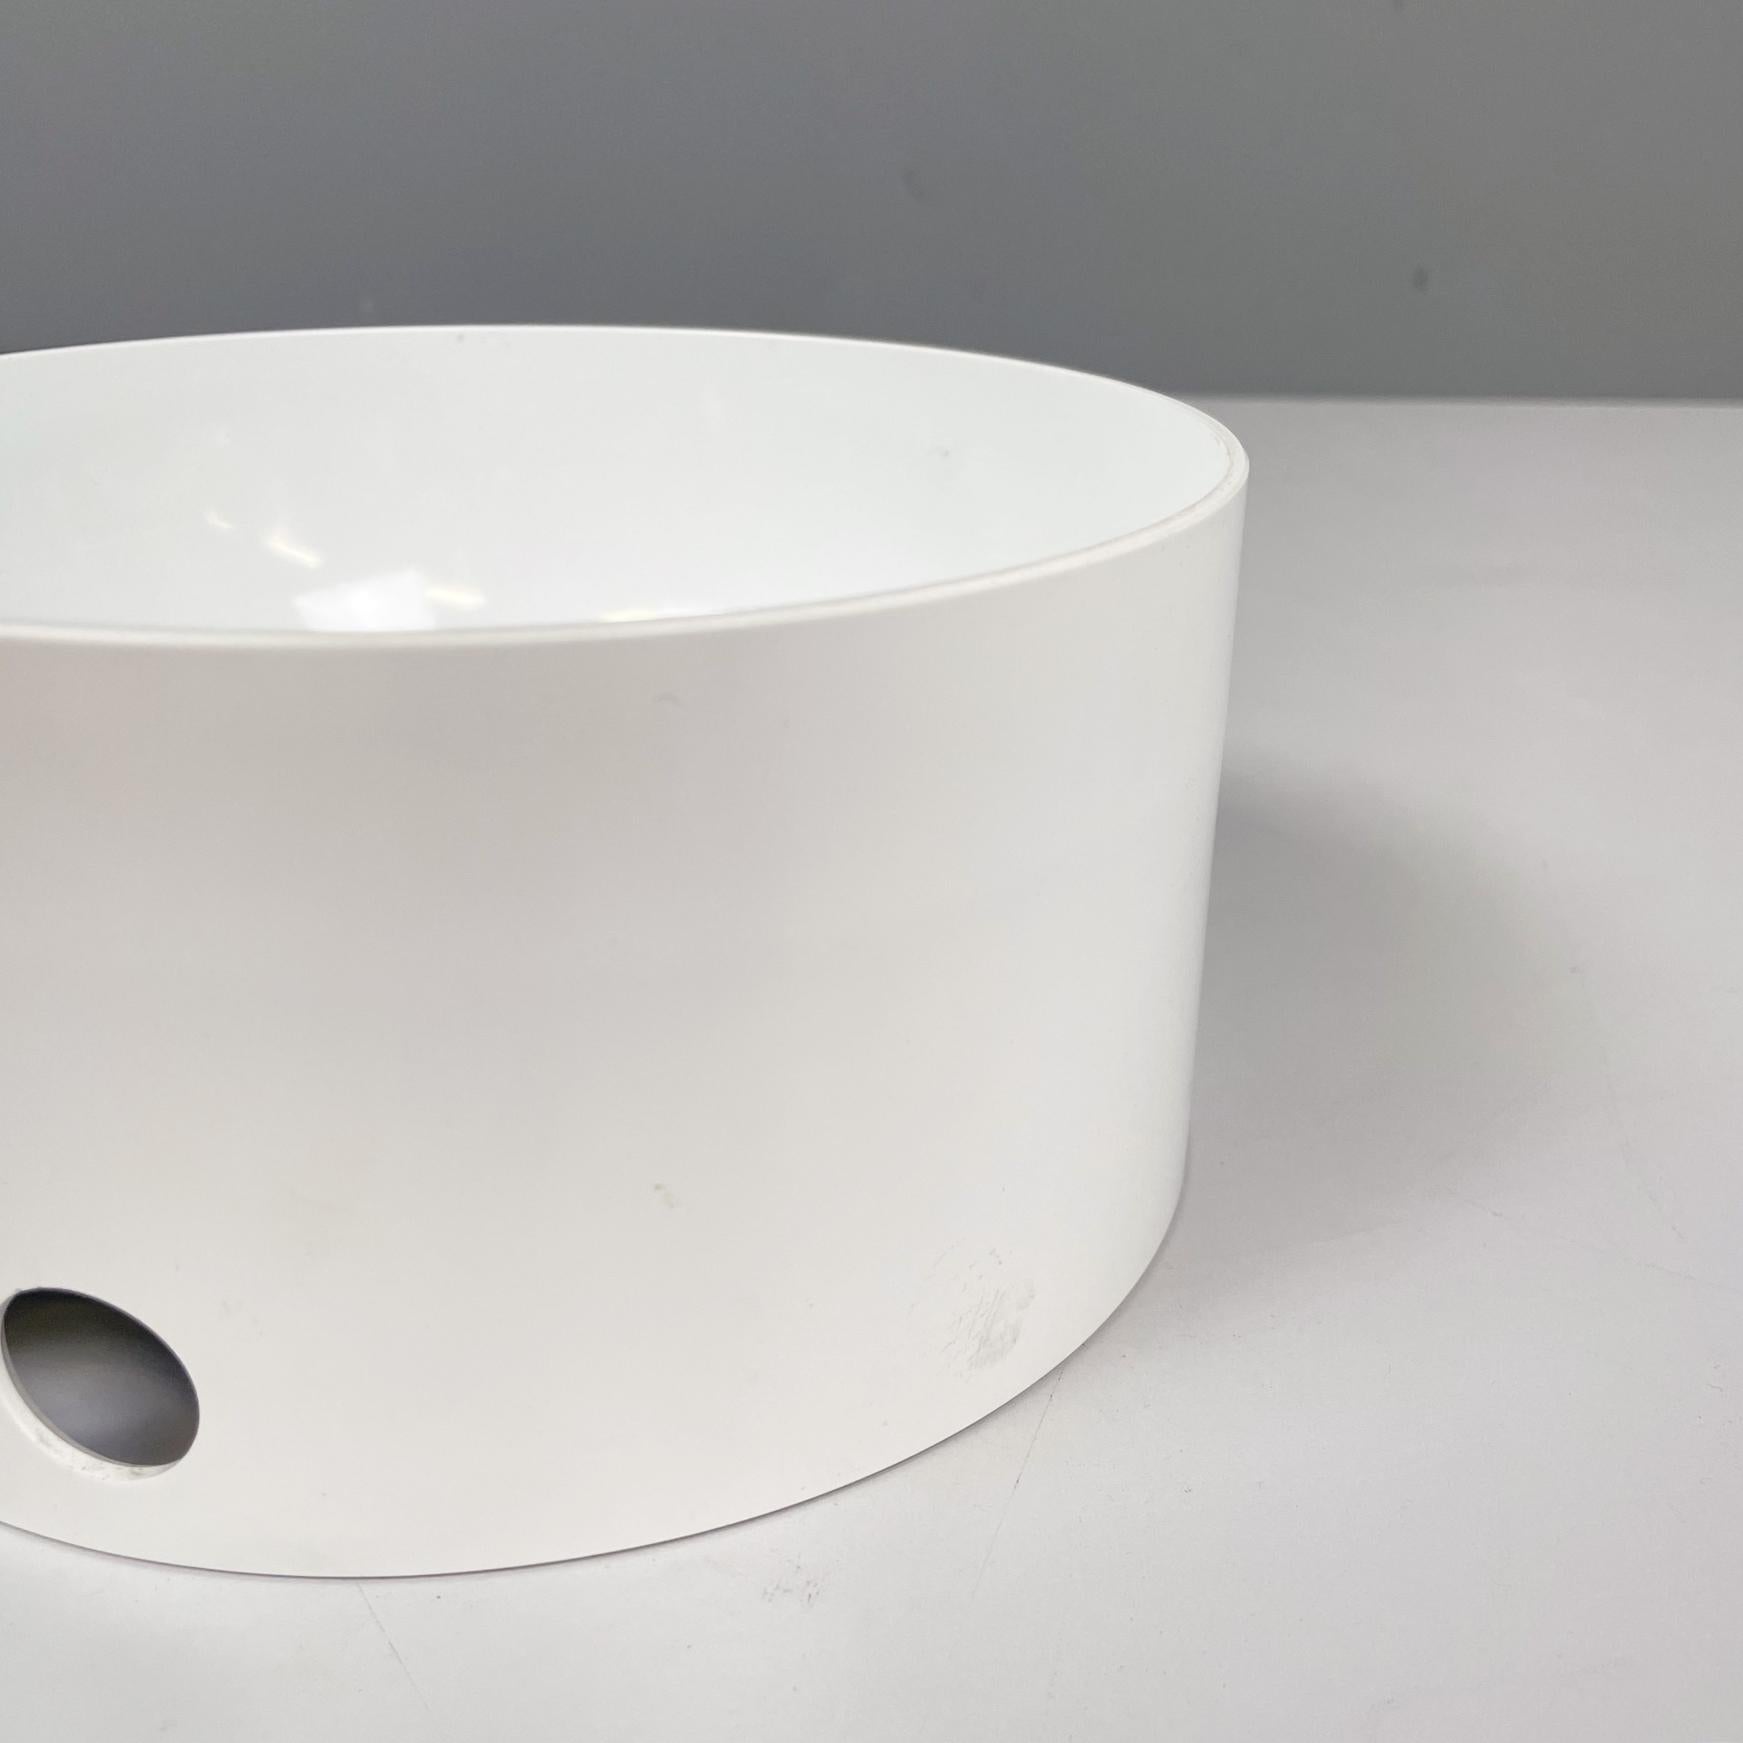 Late 20th Century Italian Modern White plastic cylindrical bowl by Enzo Mari for Danese, 1970s For Sale